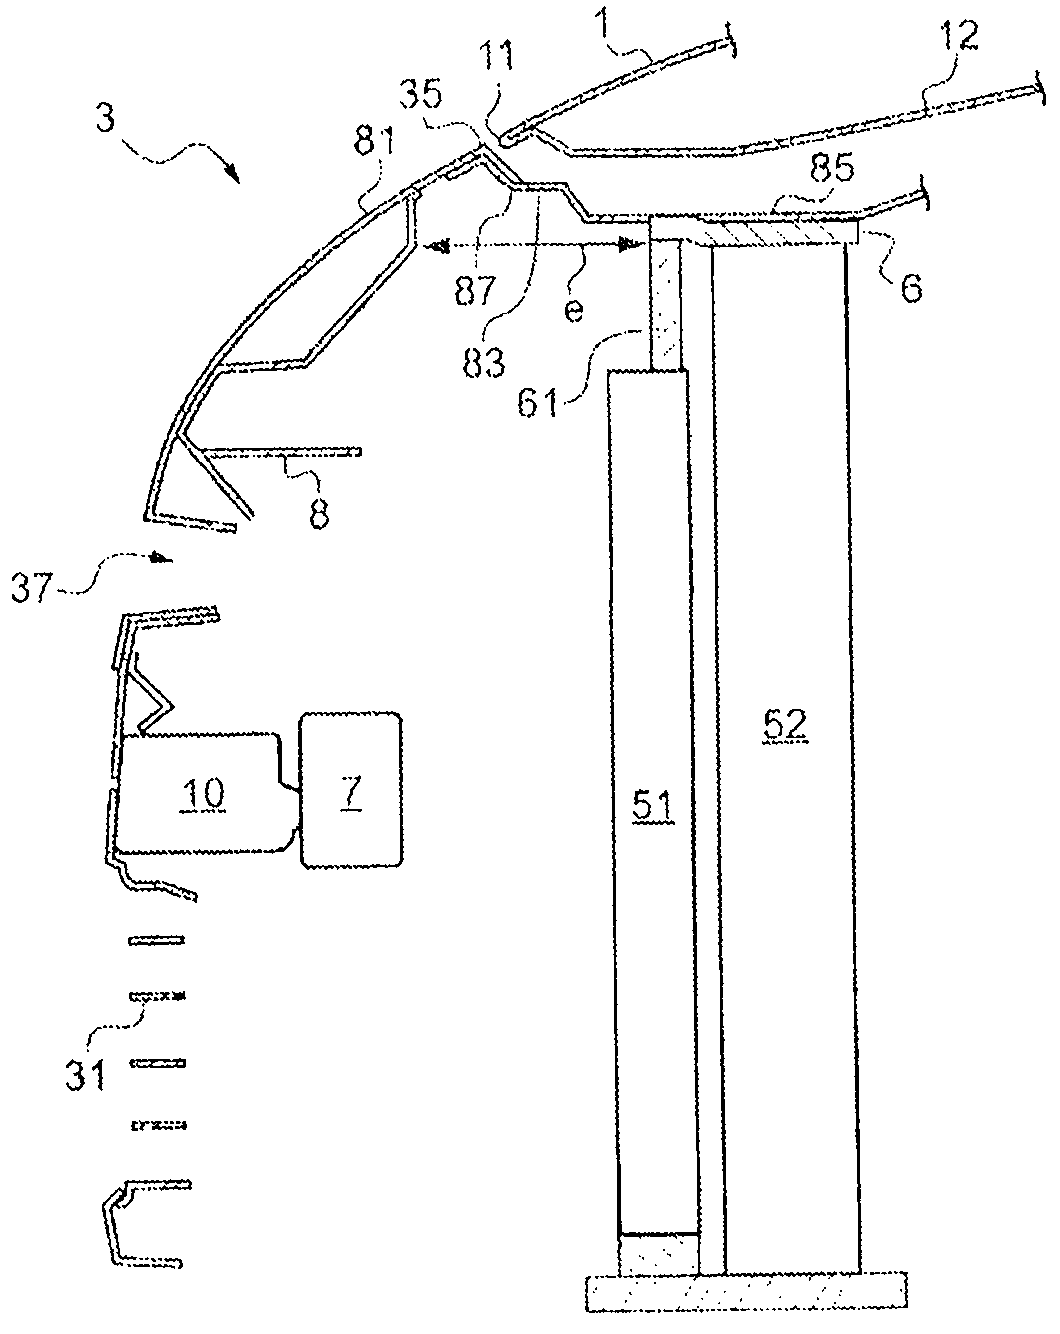 Automobile comprising a front bumper with a central portion extending as far as the bonnet of said vehicle